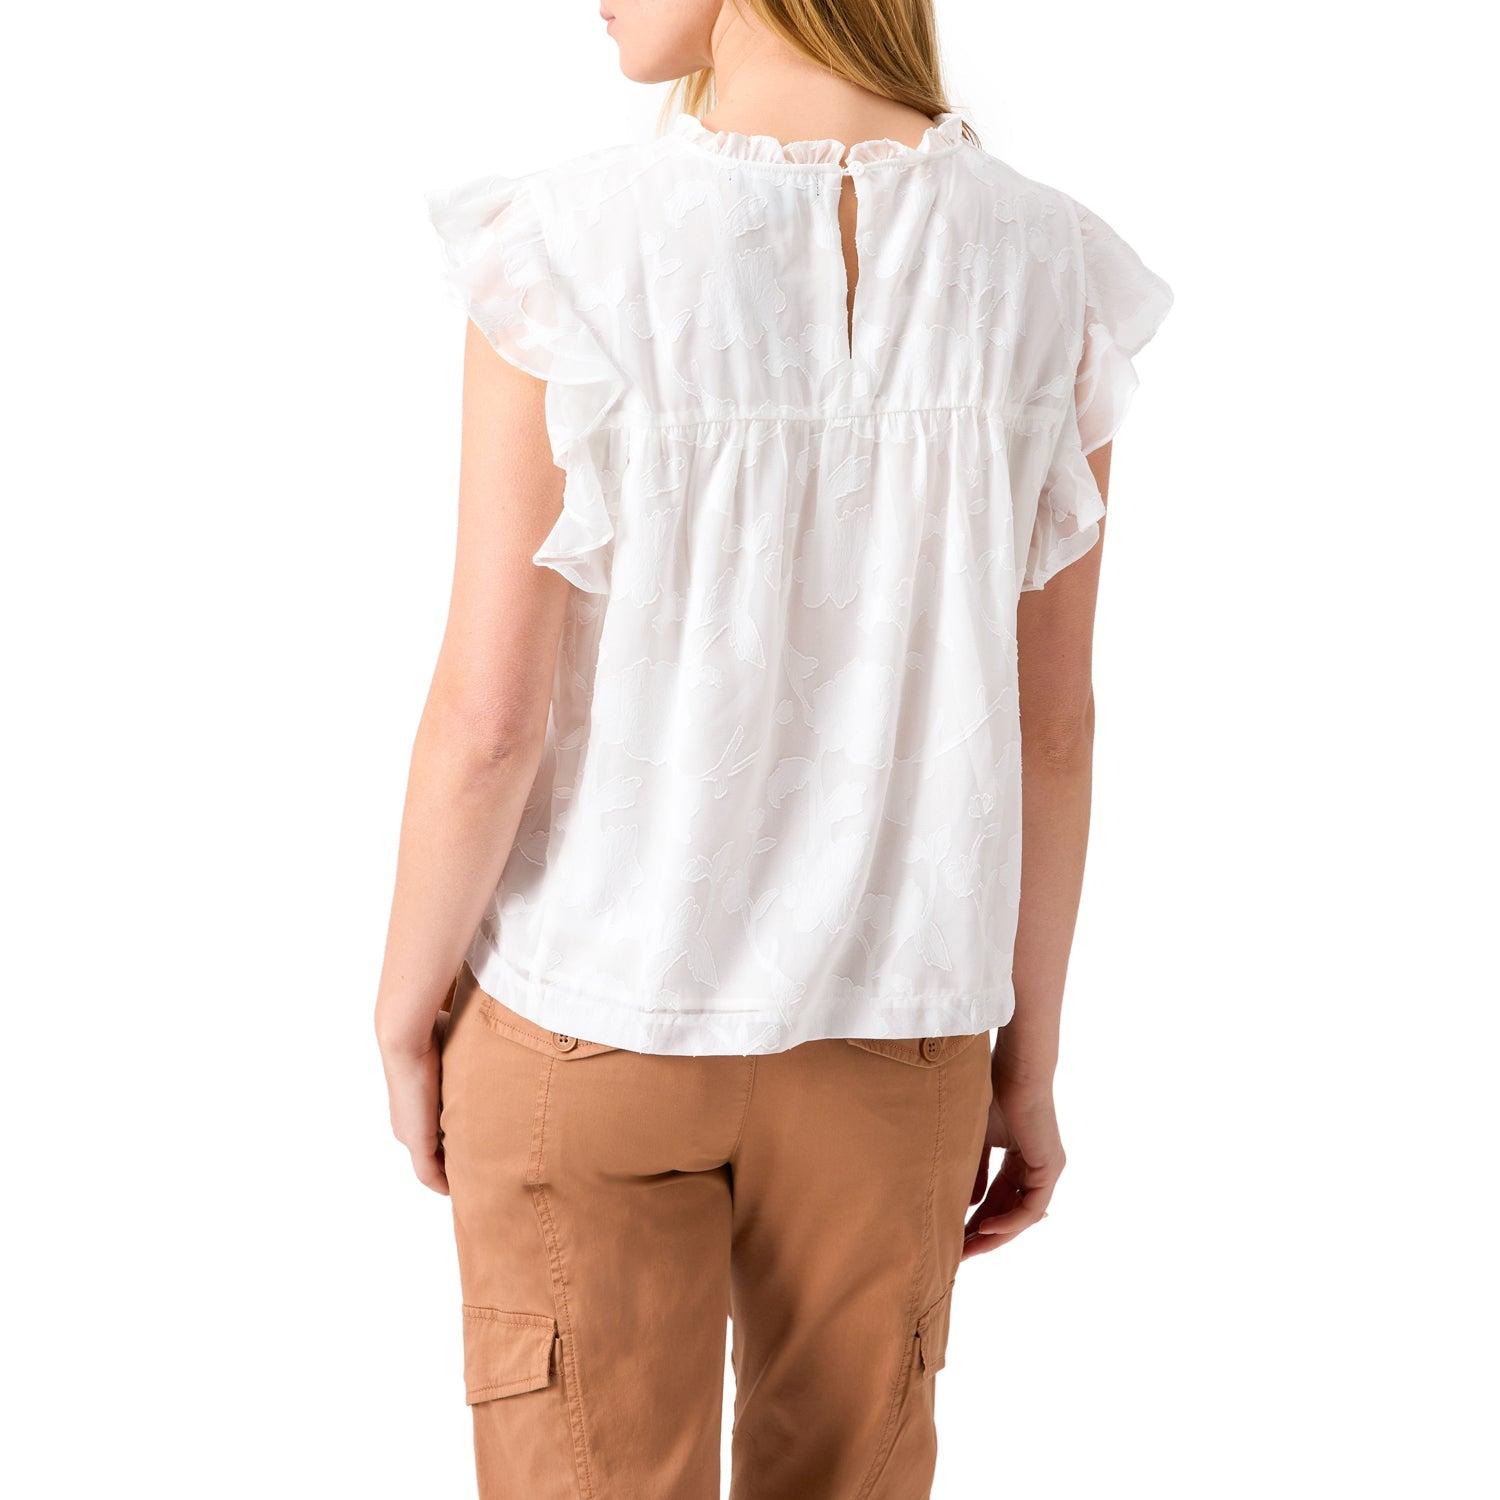 Sanctuary Spring Gathering Top - White Clothing - Tops - Shirts - Blouses - Blouses Mid Price by Sanctuary | Grace the Boutique